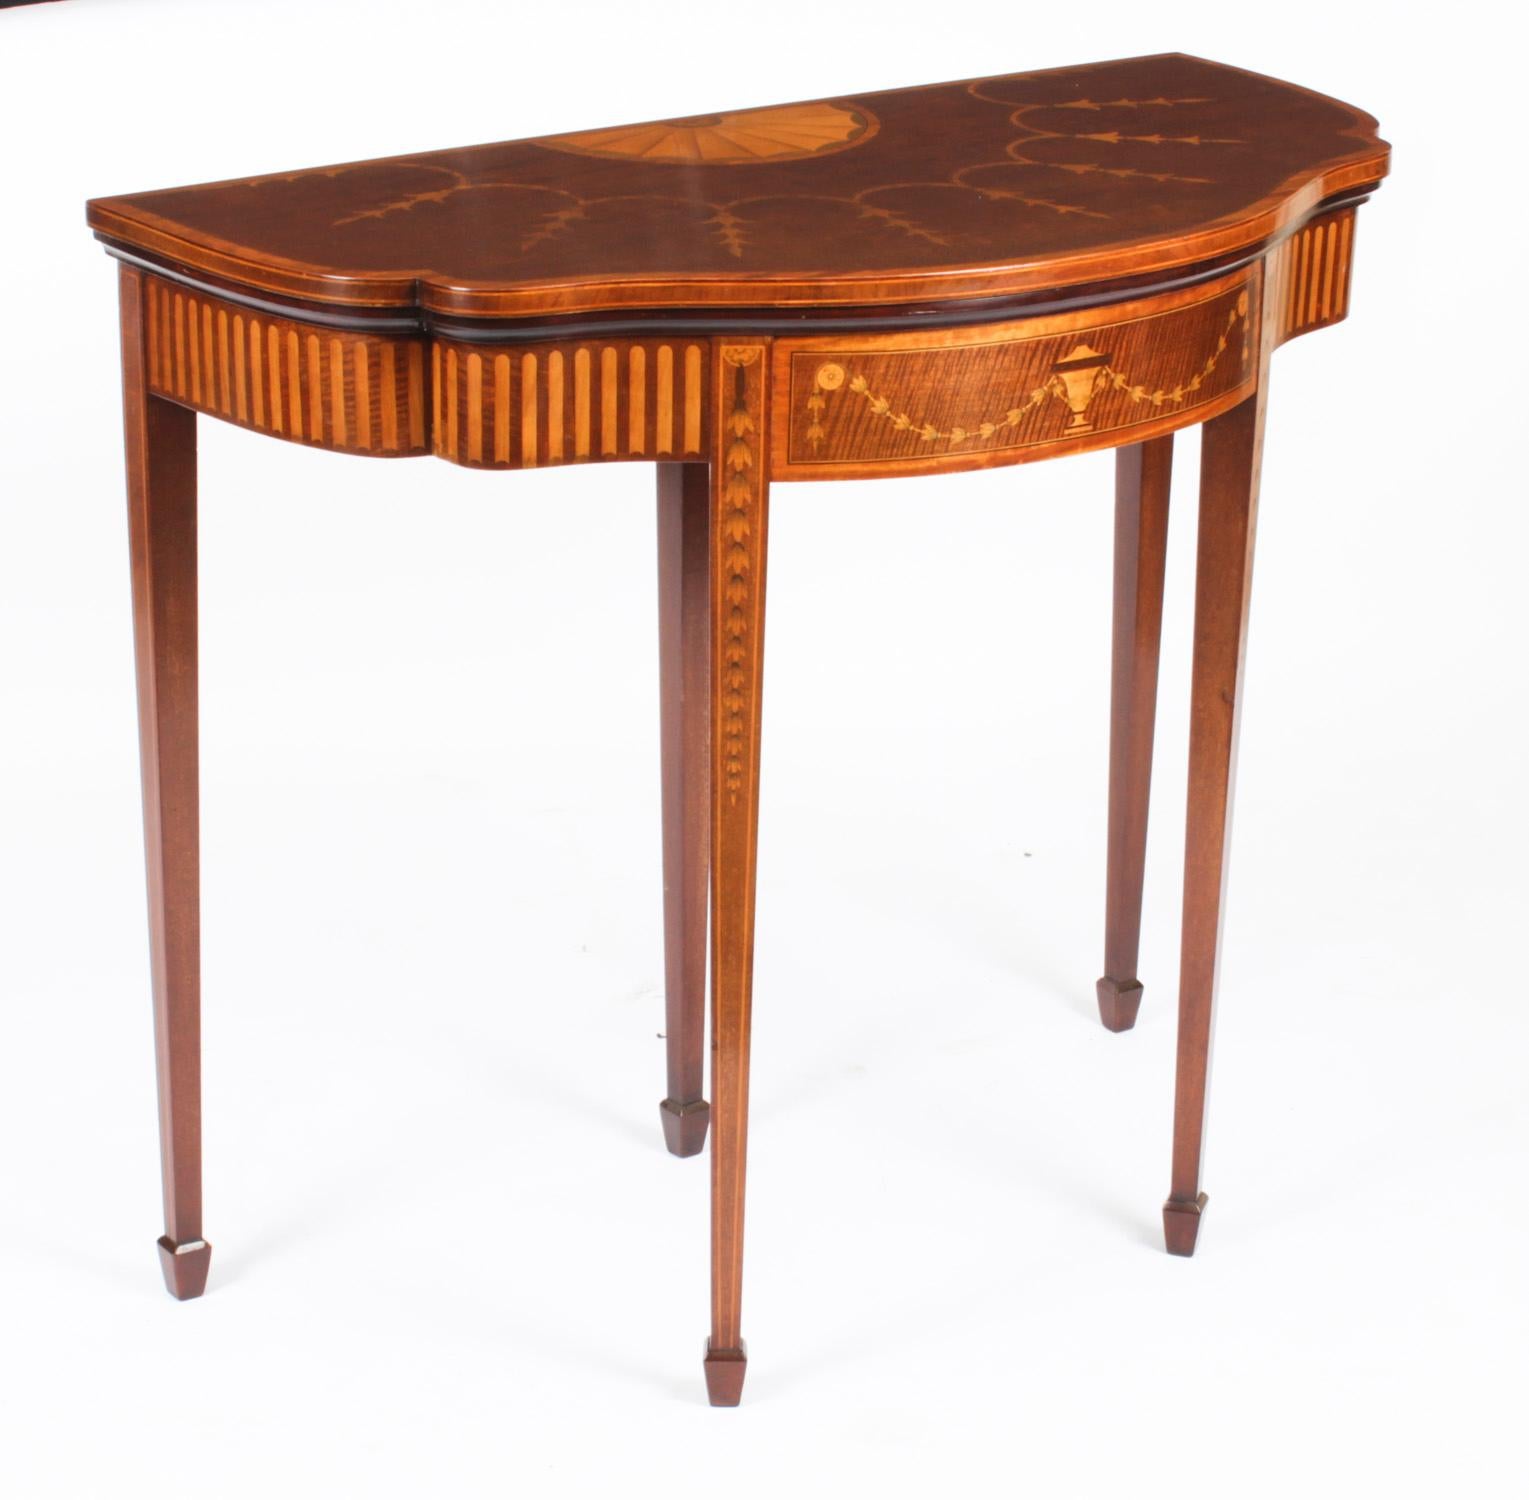 Antique Mahogany and Satinwood Inlaid Serpentine Card Console Table 19th Century For Sale 15